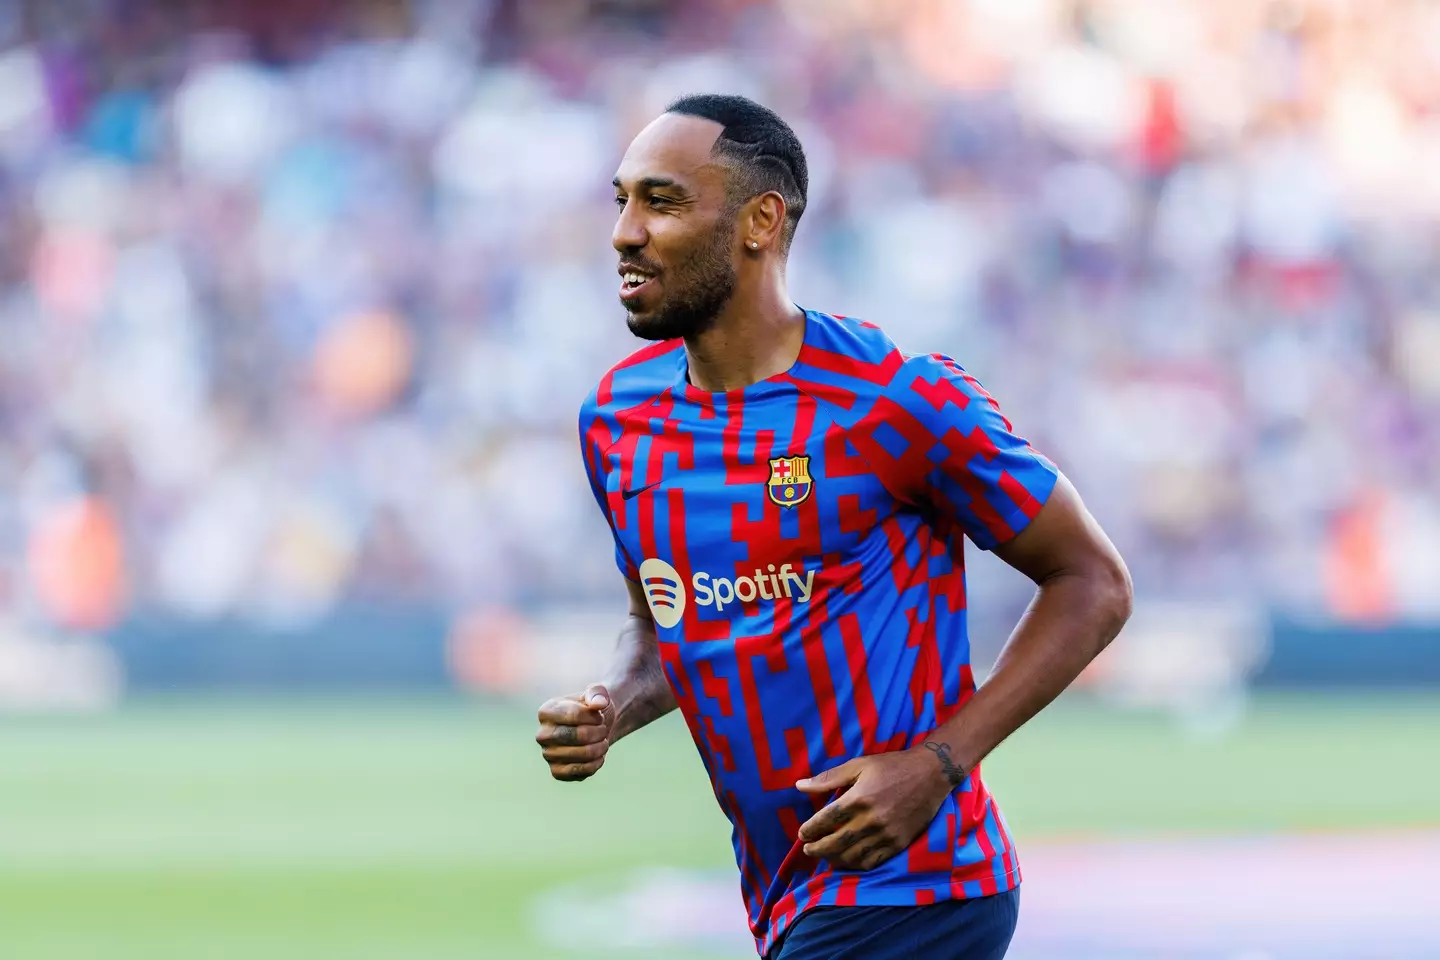 Aubameyang during his short spell on the pitch for the Spanish giants this season. Image: Alamy